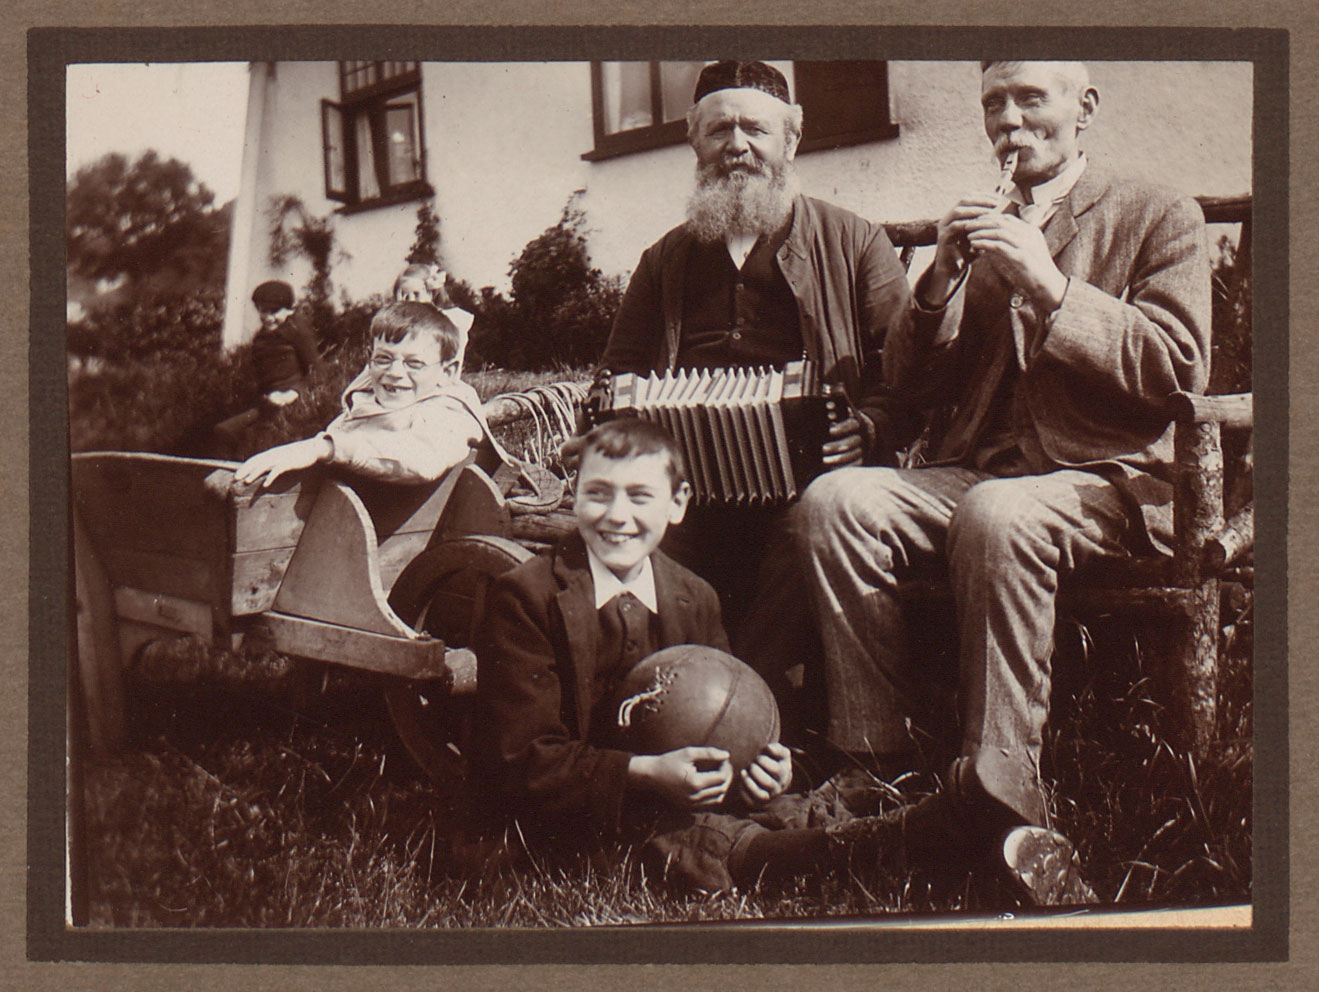 Old men with a whistle and accordion sit with two young boys with a football and wheelbarrow